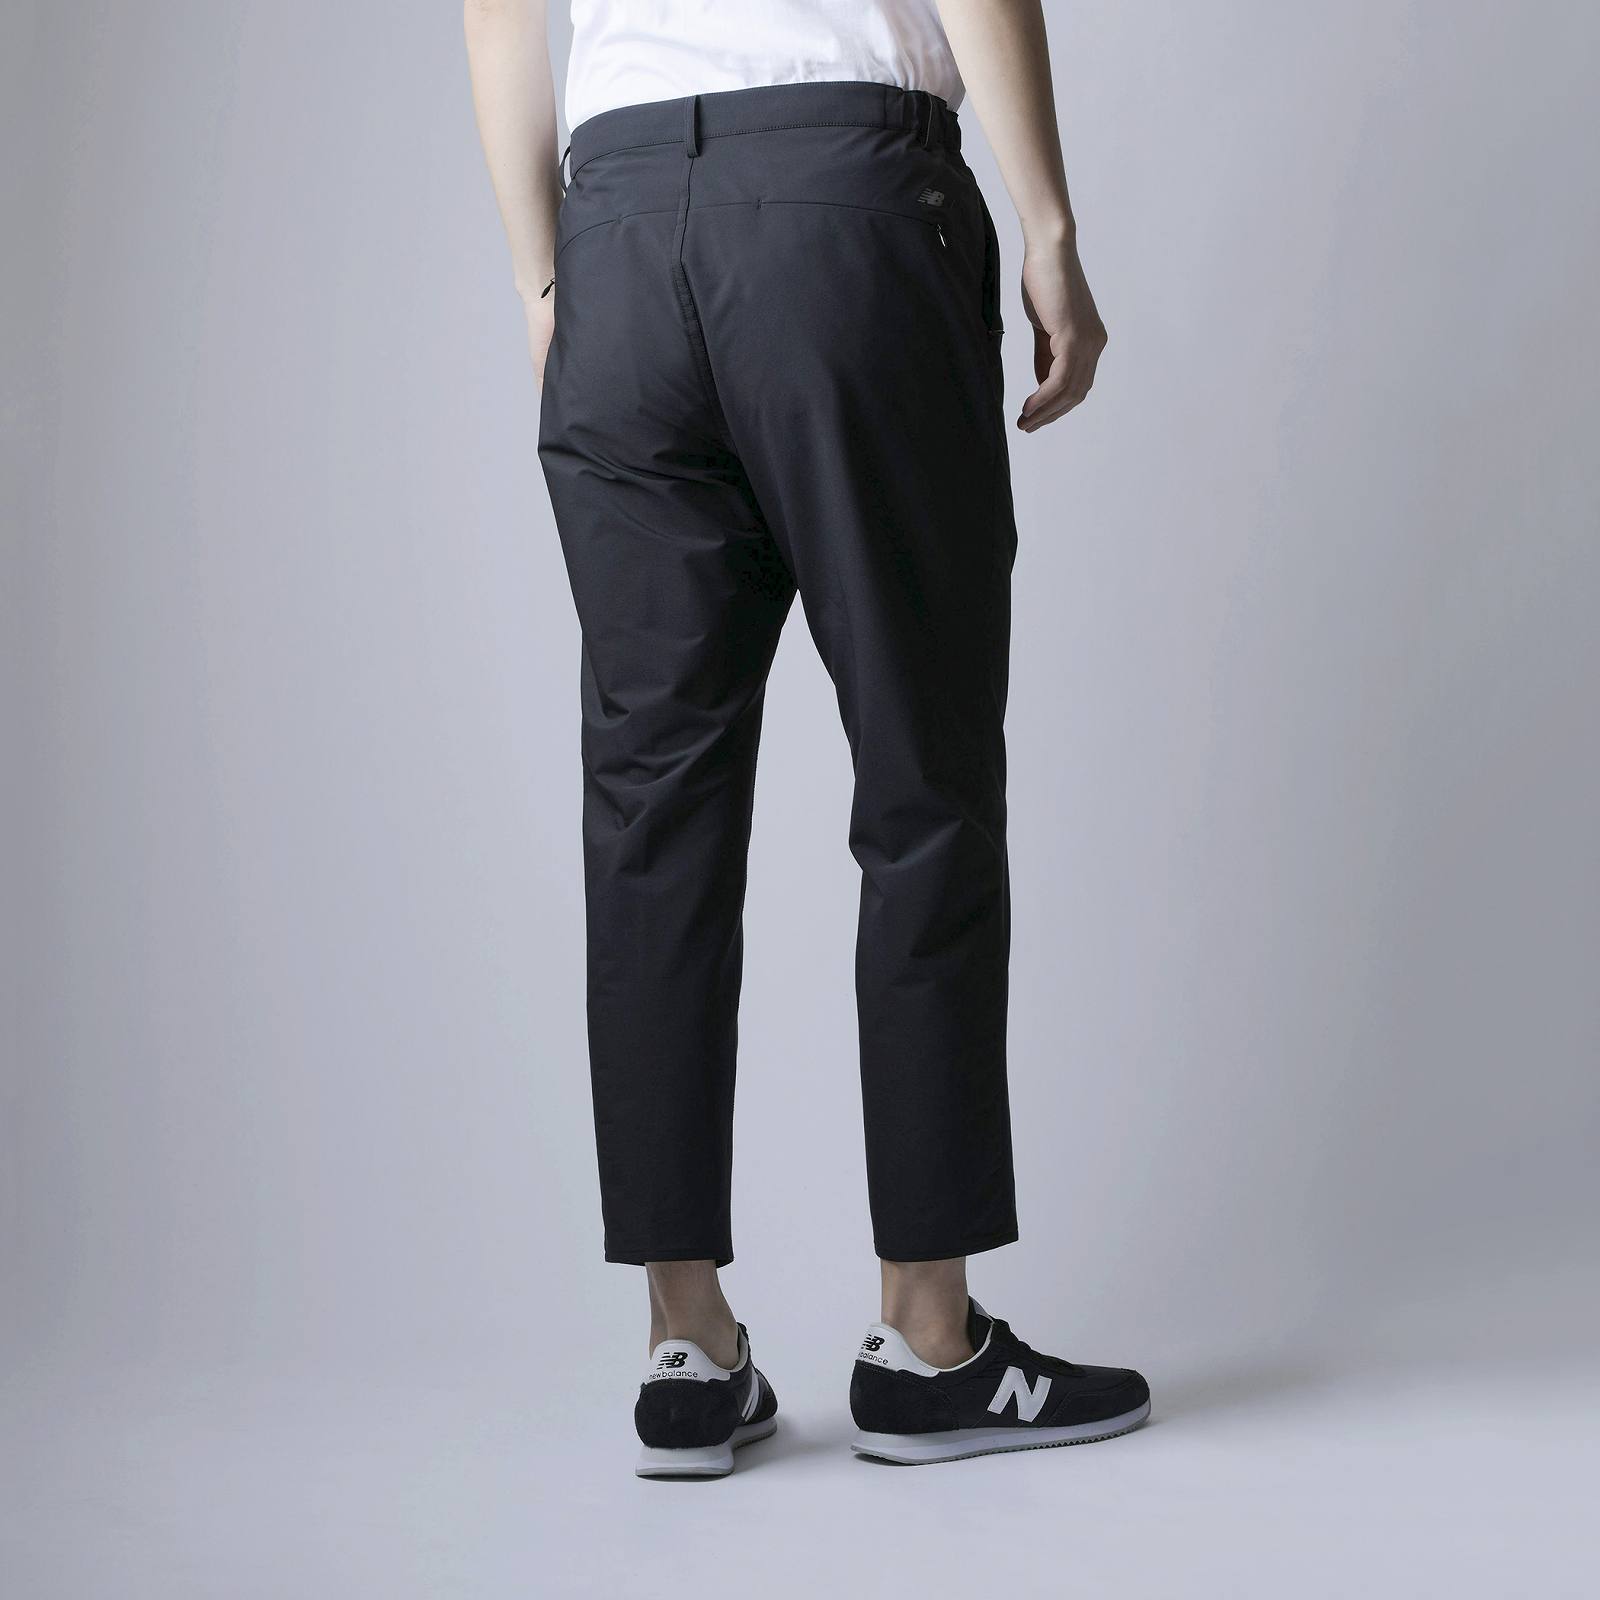 NB公式アウトレット】ニューバランス | Met24 SLIM TAPERED FIT|New